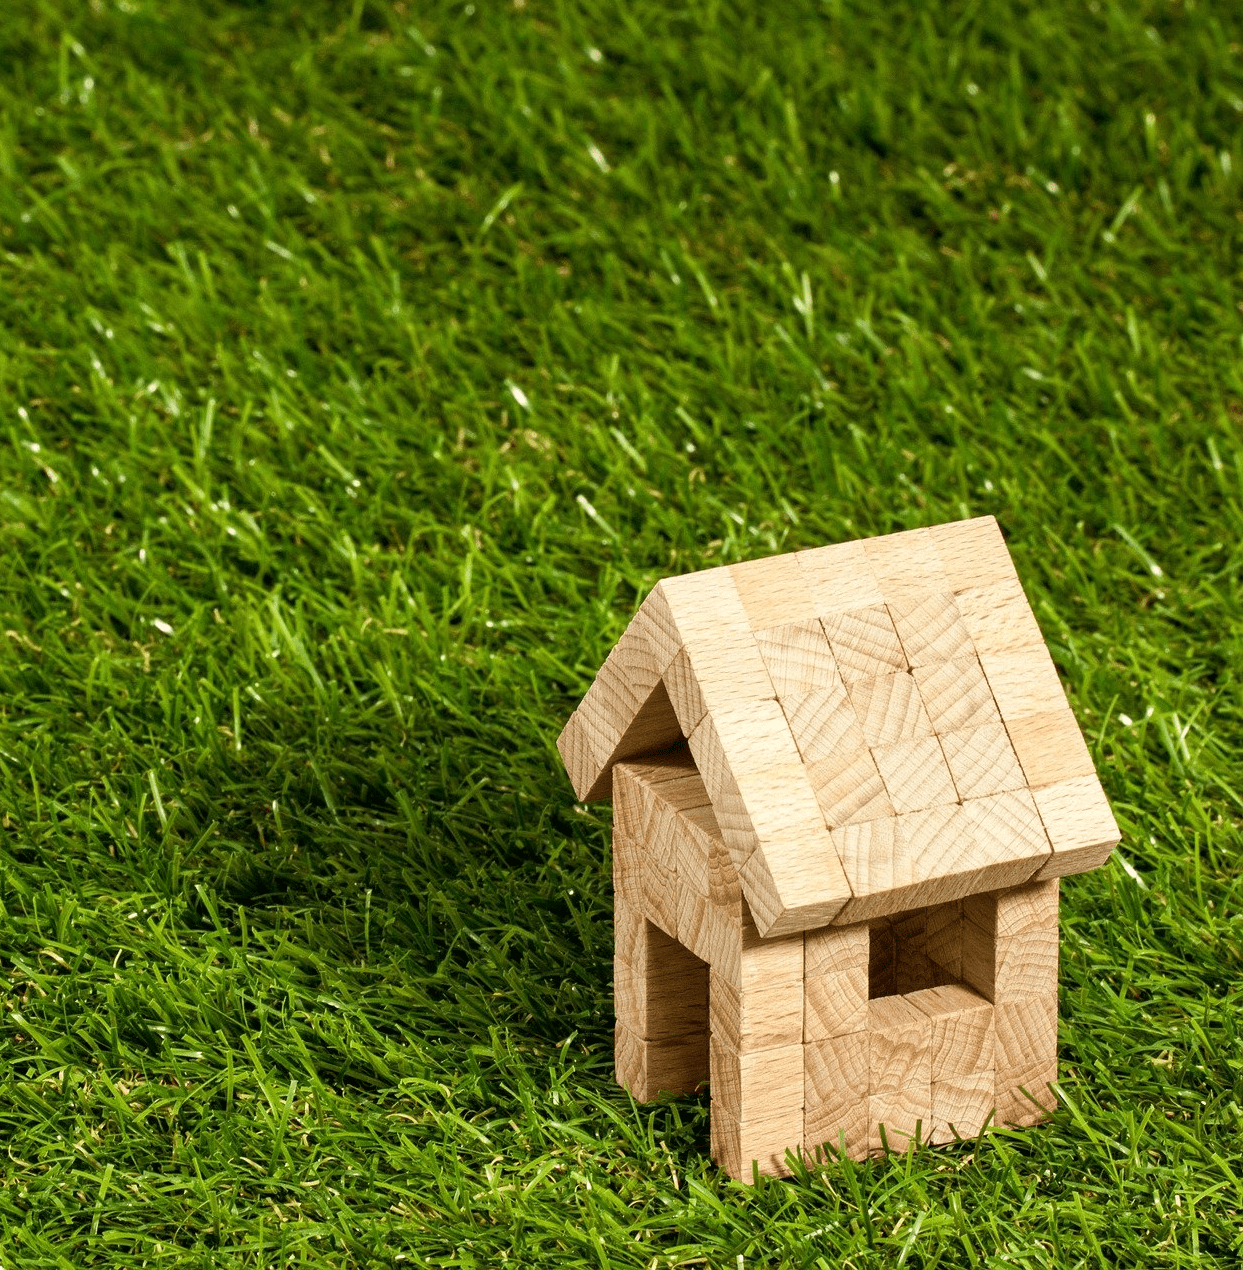 A small wooden toy house with a gabled roof stands on a patch of lush green grass. The house is made of light-colored wooden blocks, creating a simple, rustic structure. The background is filled with evenly cut pet-friendly artificial turf, giving a sense of an outdoor setting in Gilbert, AZ.